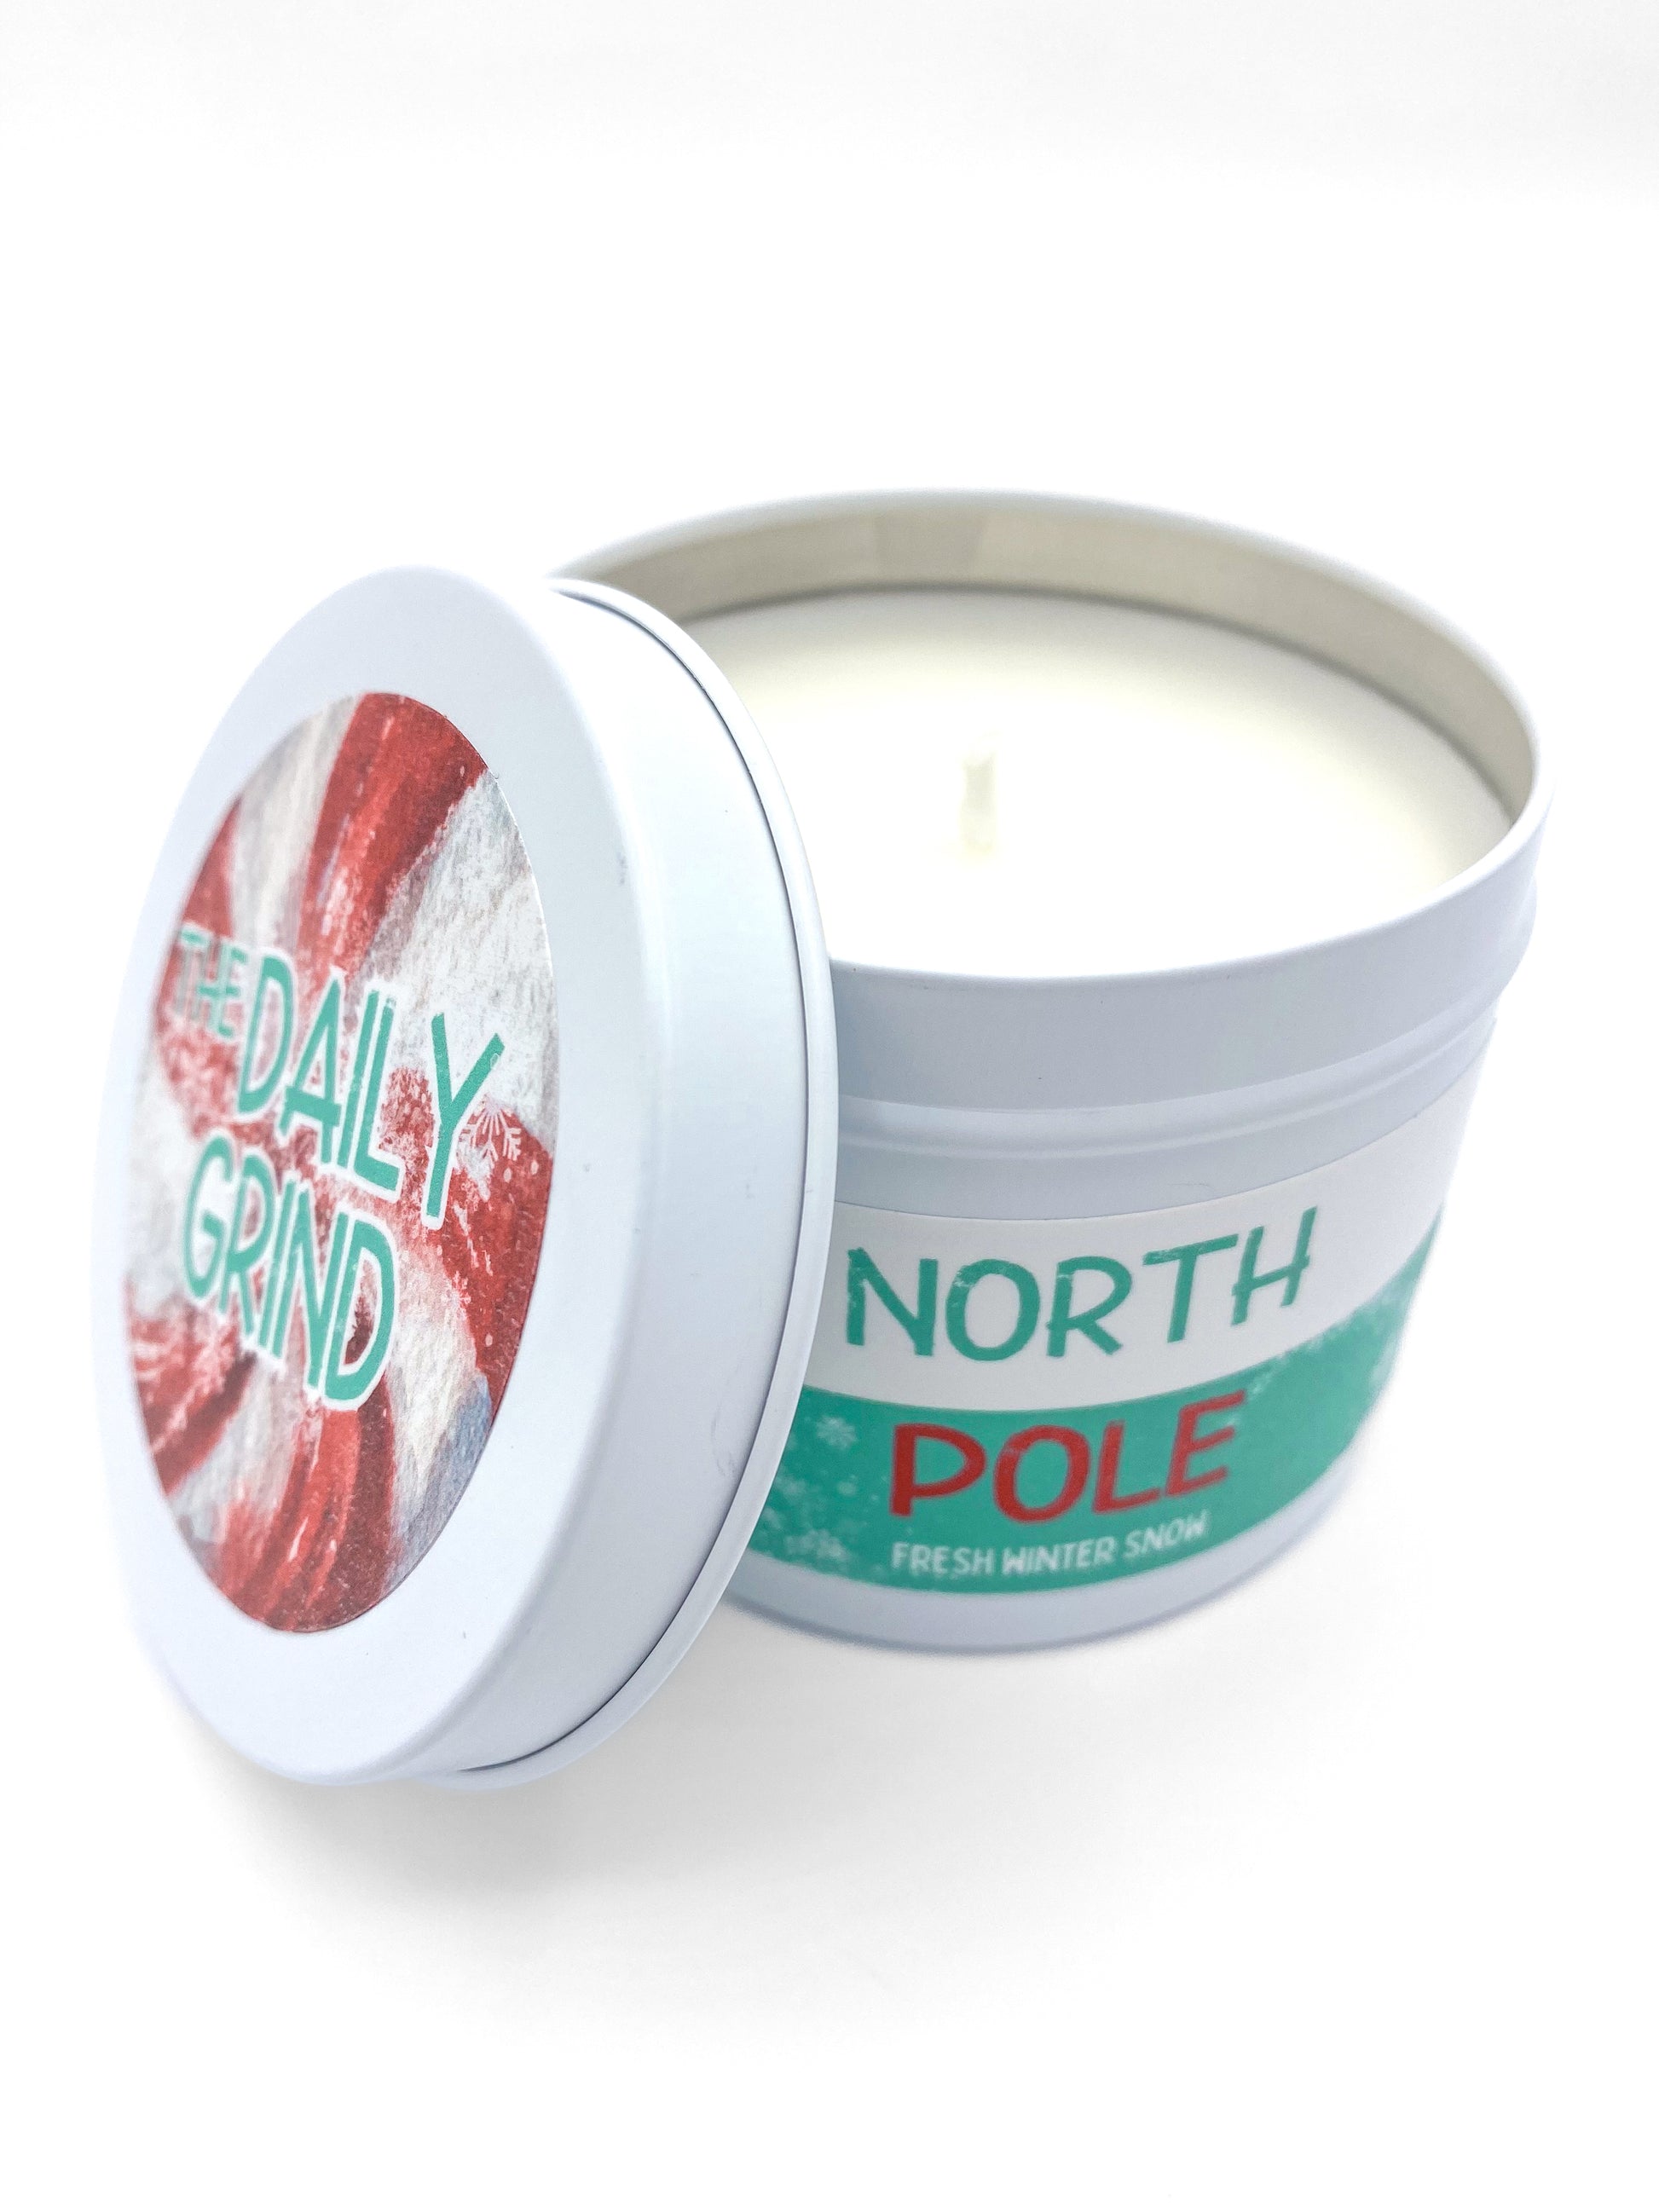 Unlit "North Pole" candle in white tin